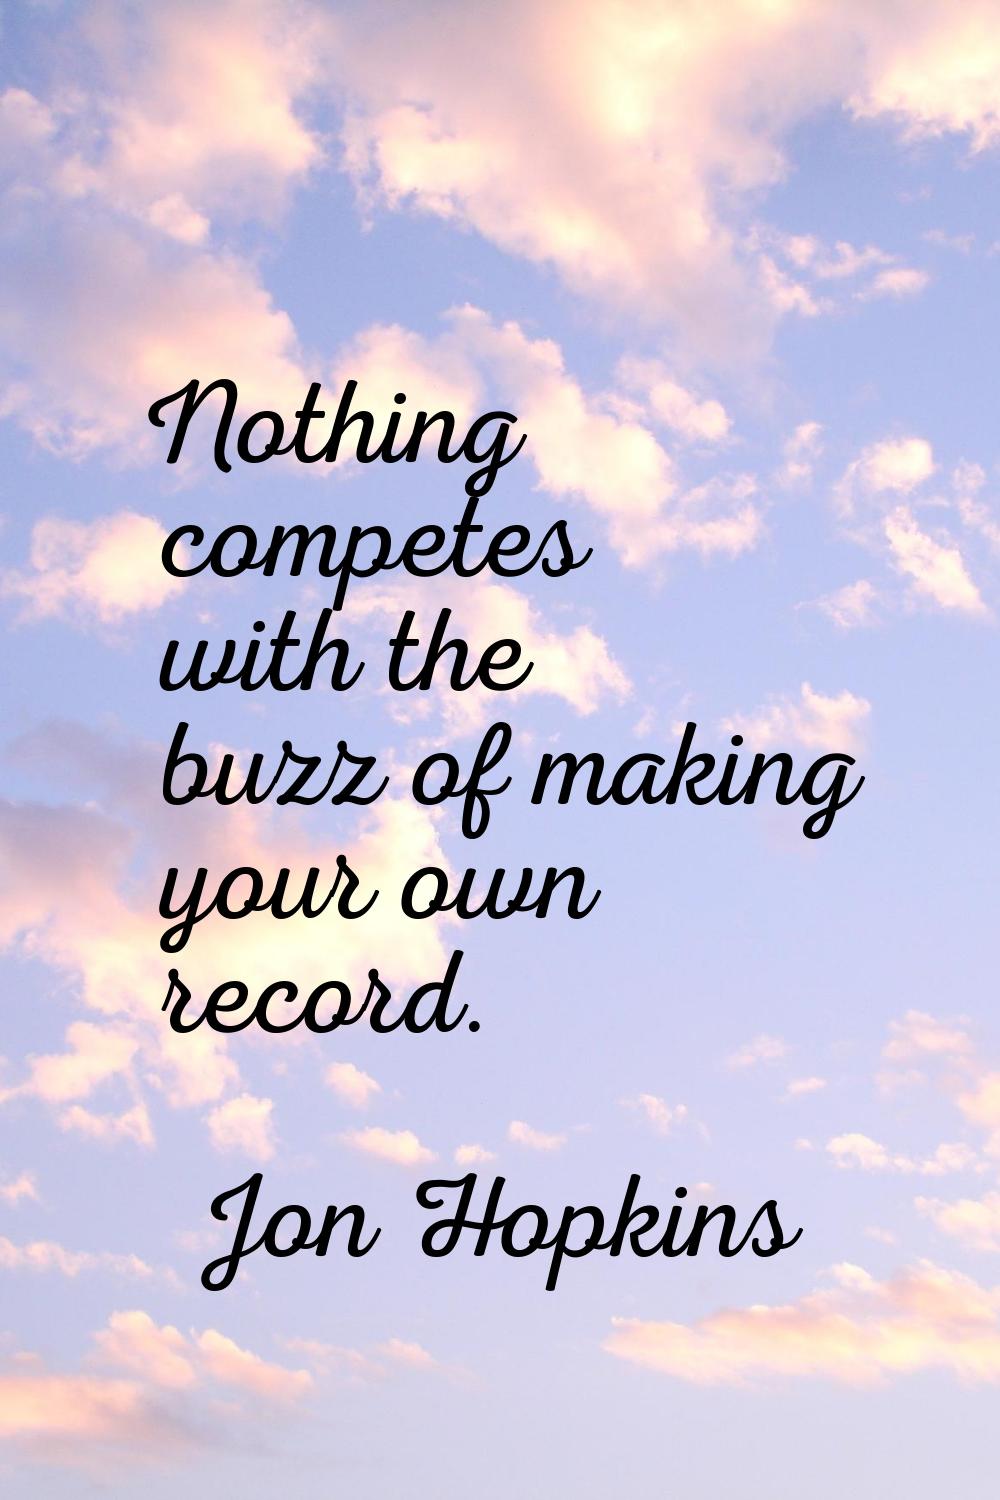 Nothing competes with the buzz of making your own record.